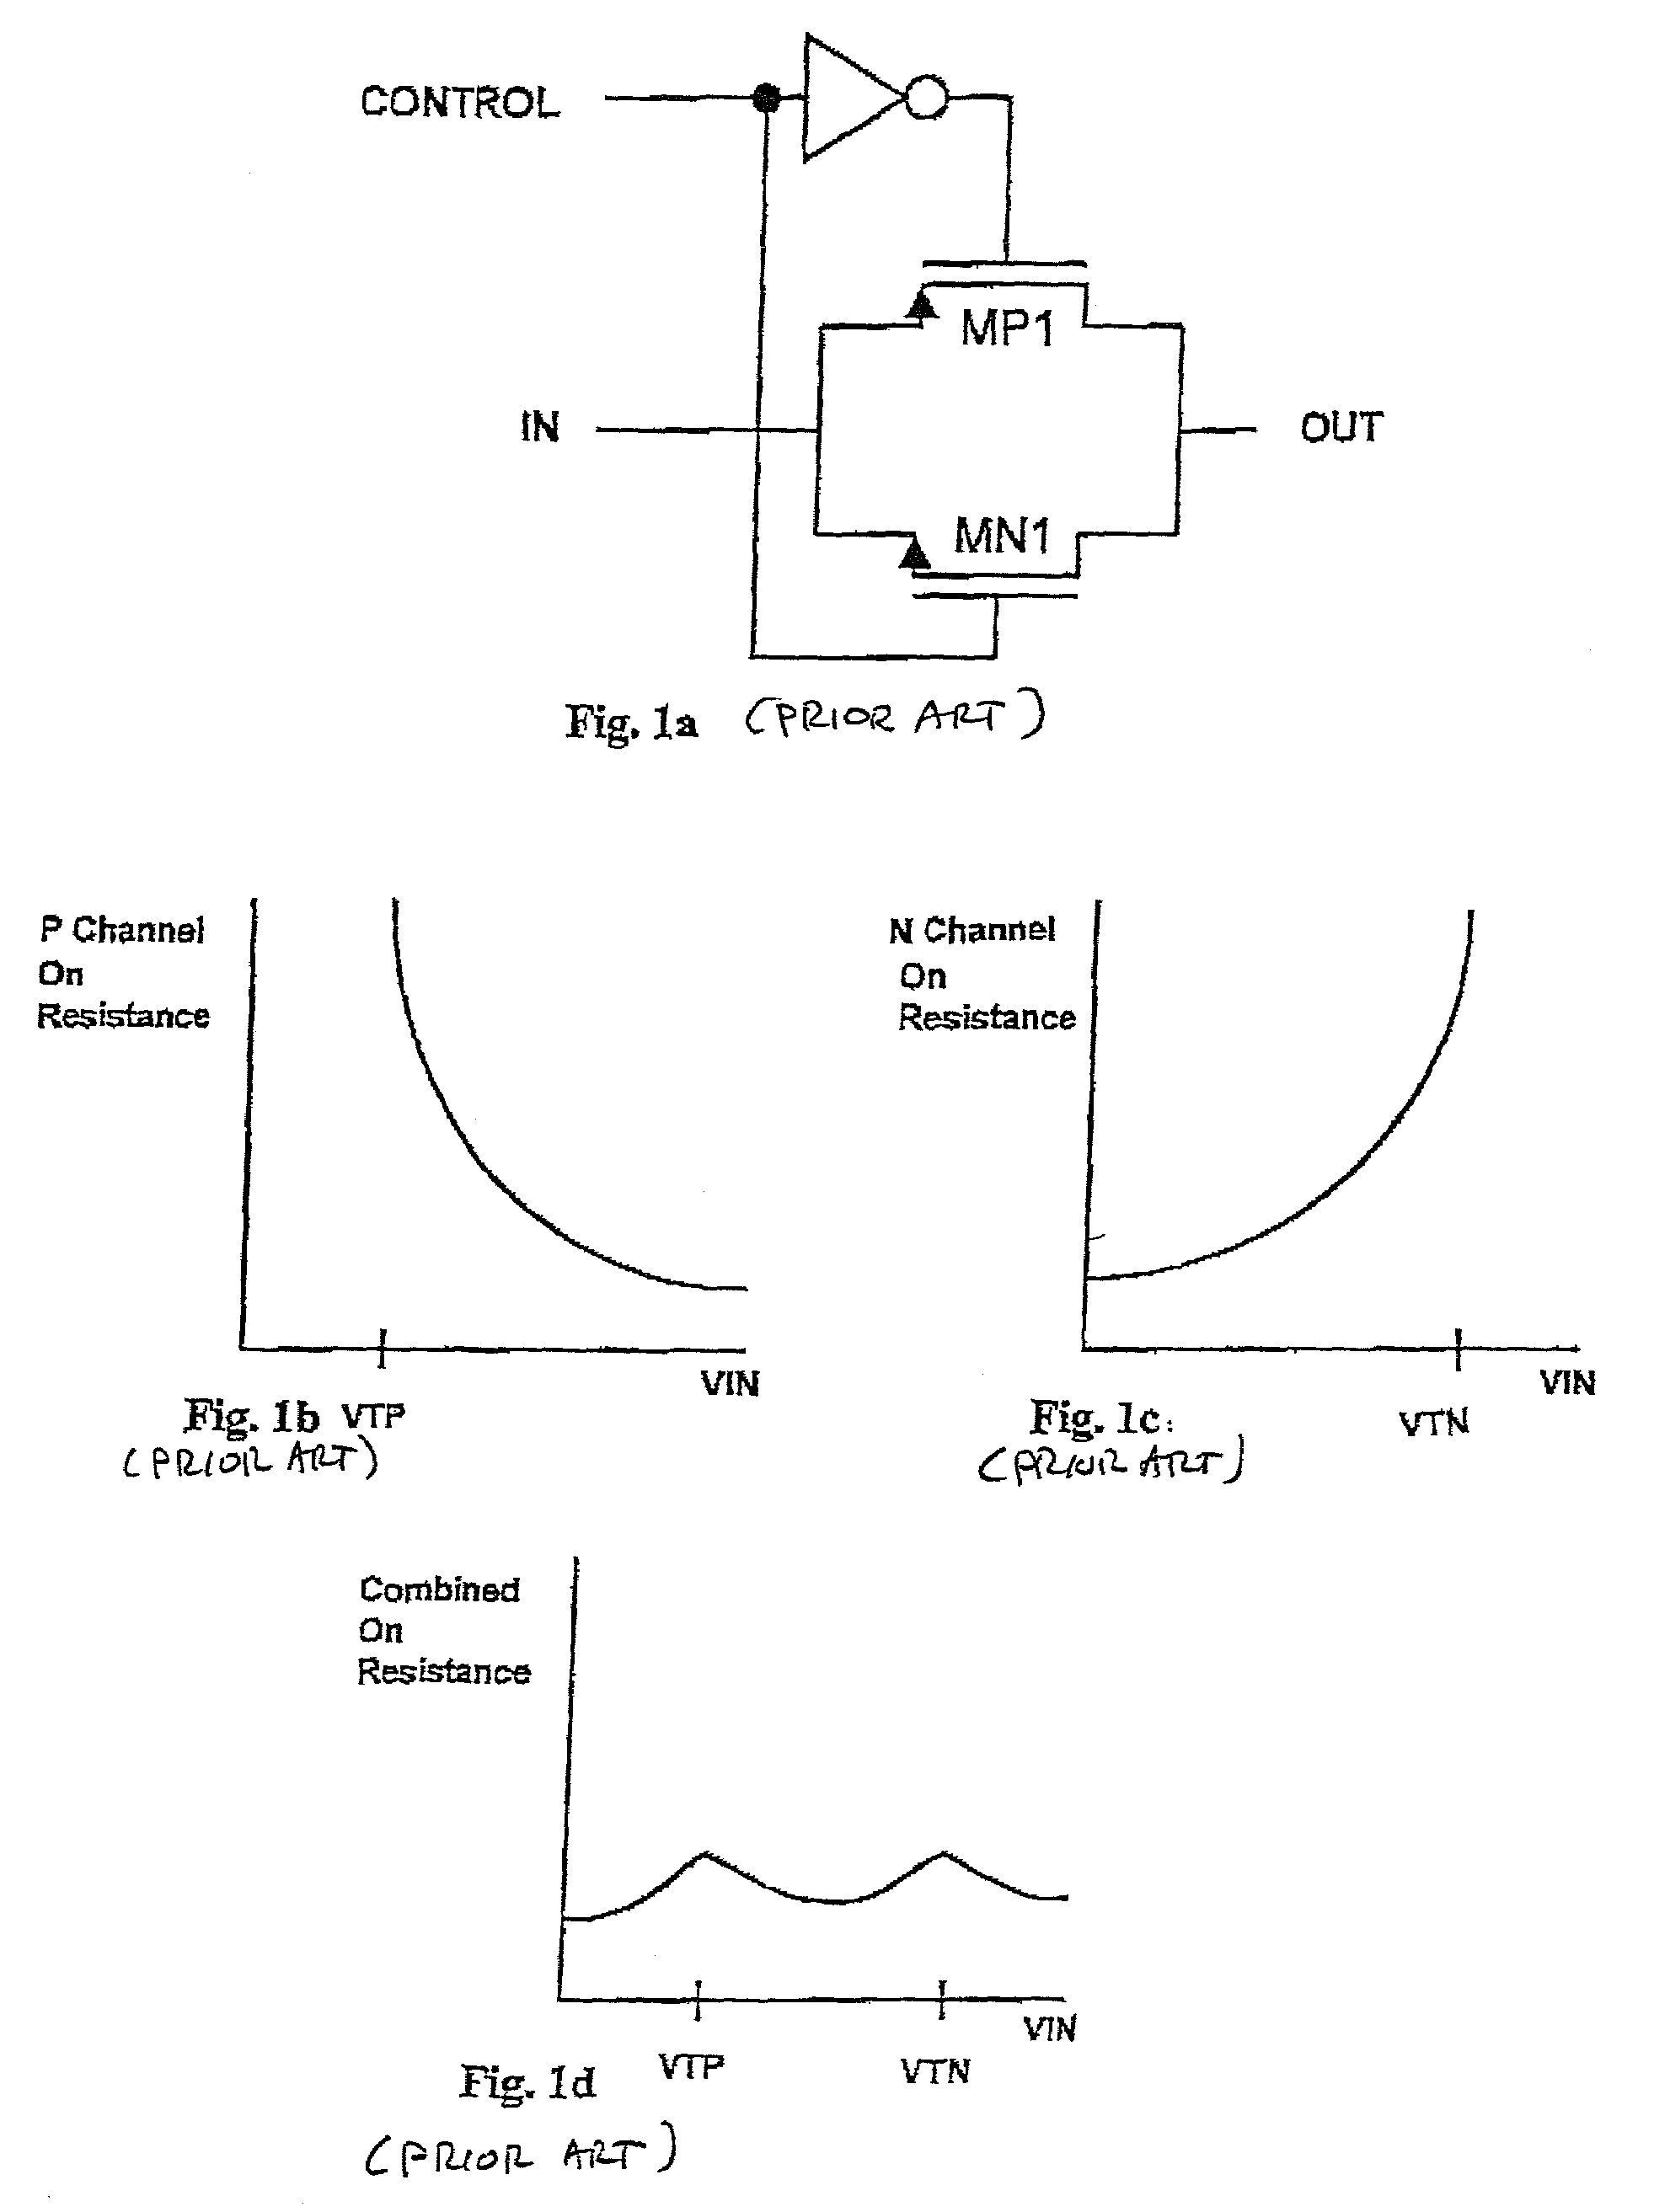 Method and apparatus for switching audio and data signals through a single terminal